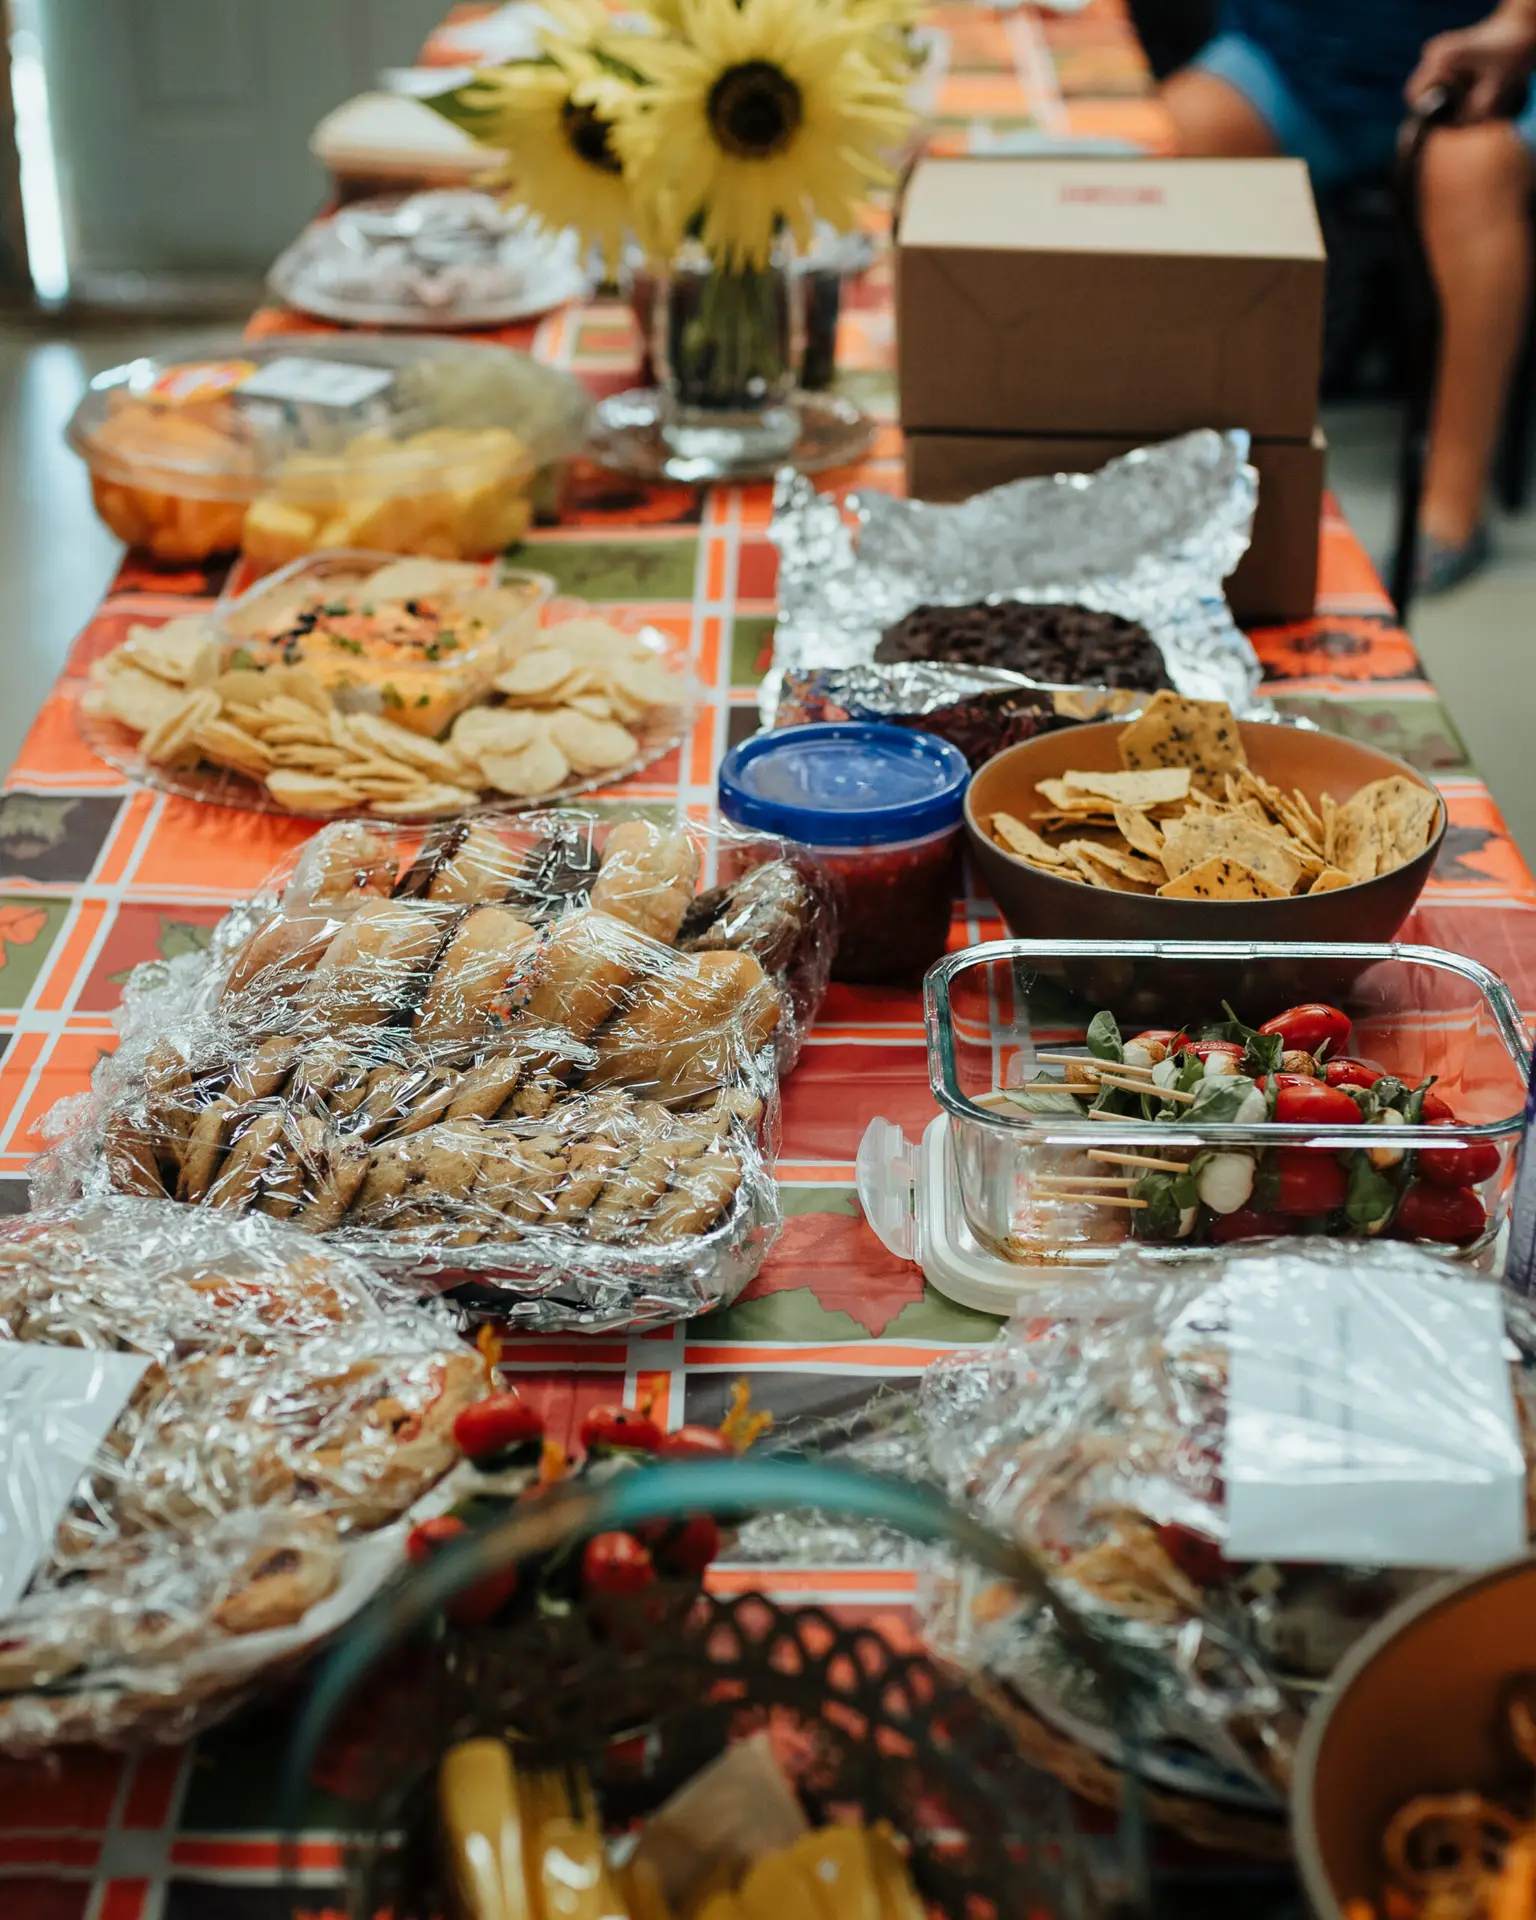 all the food goodies laid out on a table